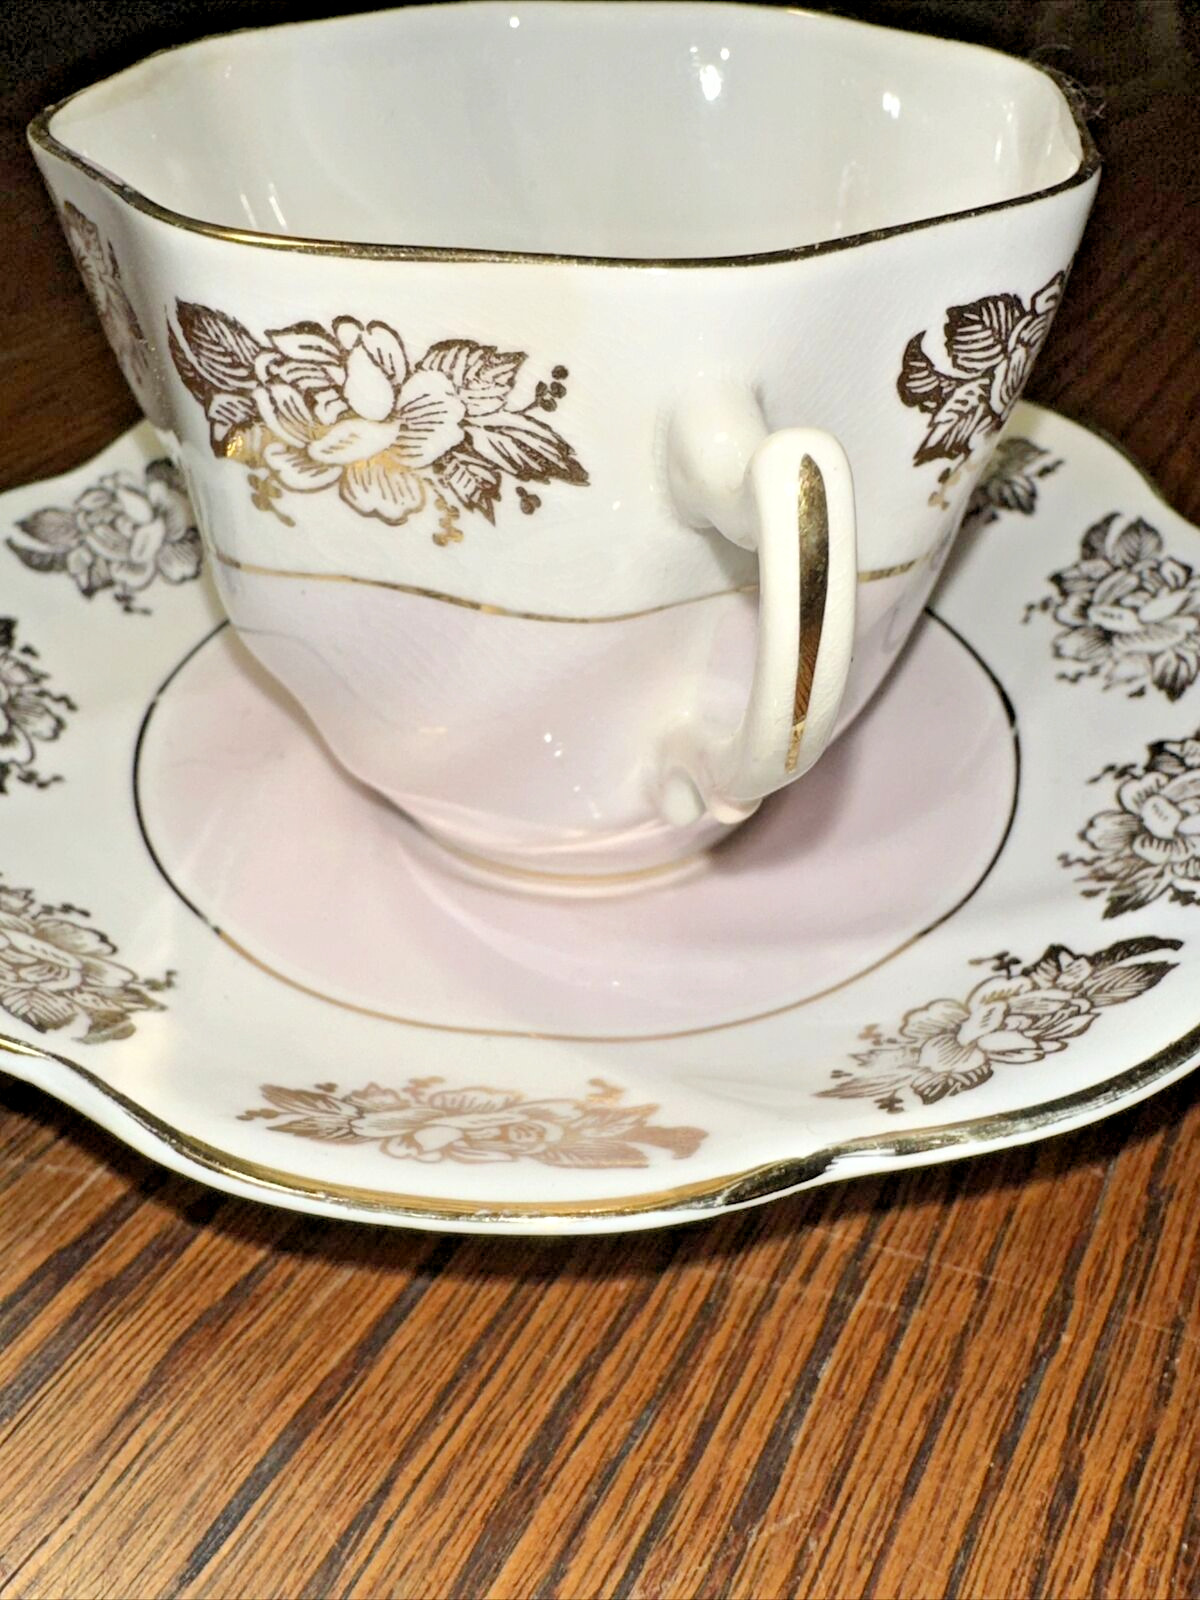 1x Crownford Fine Bone China England Delicate Tea Cup & Saucer Pink Blushed Gold